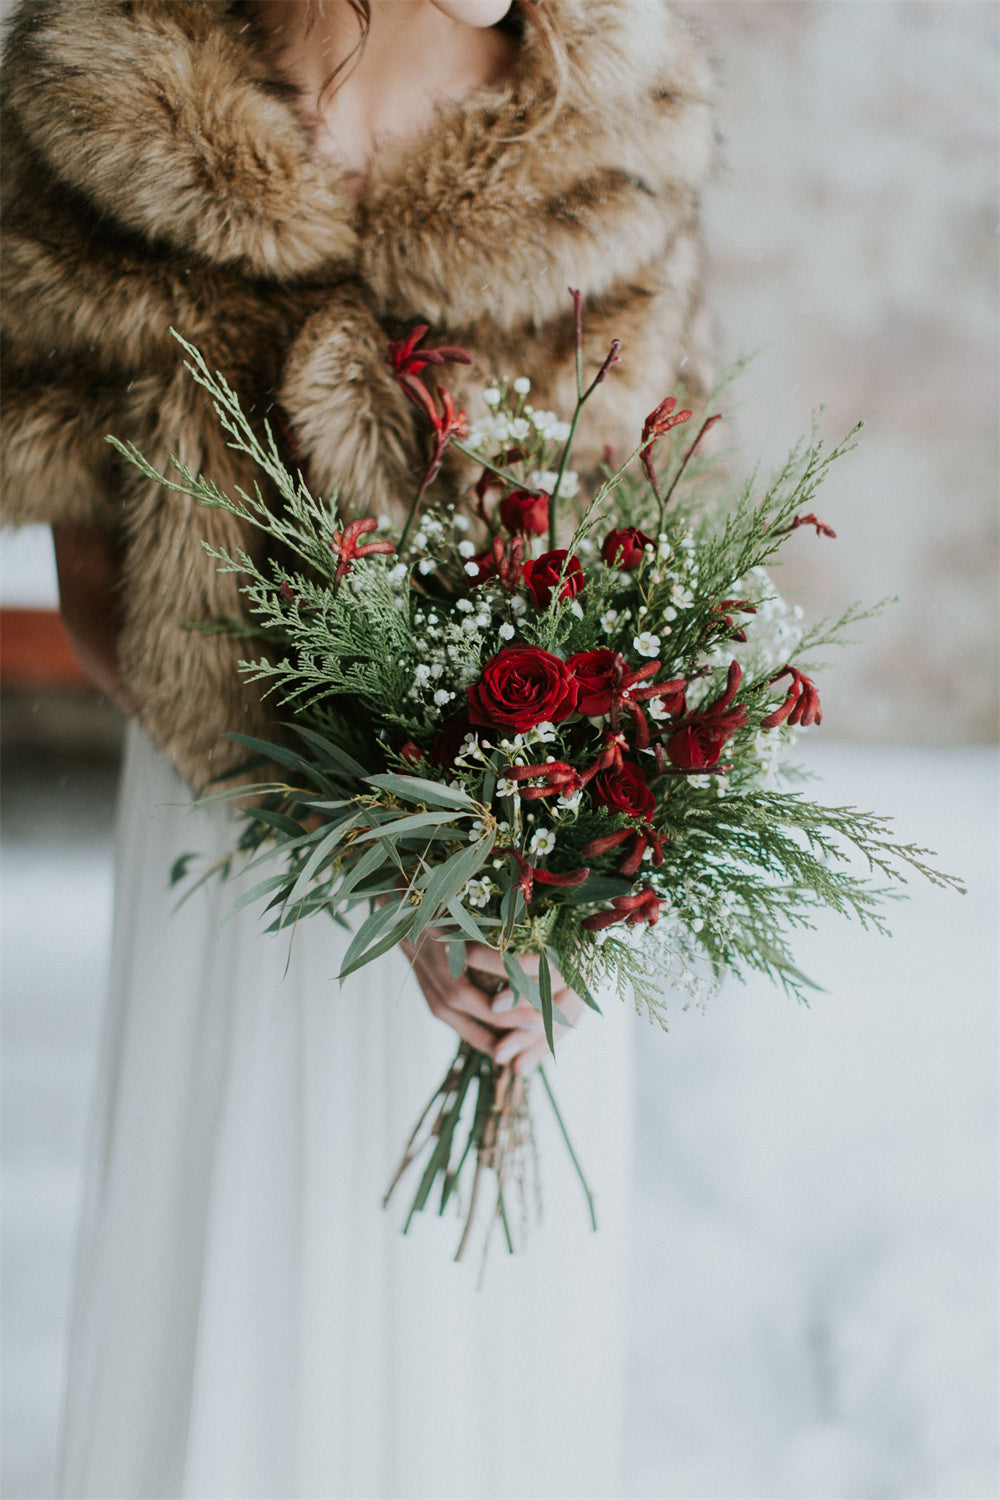 Winter Wedding Bouquets with Red Roses and Greenery